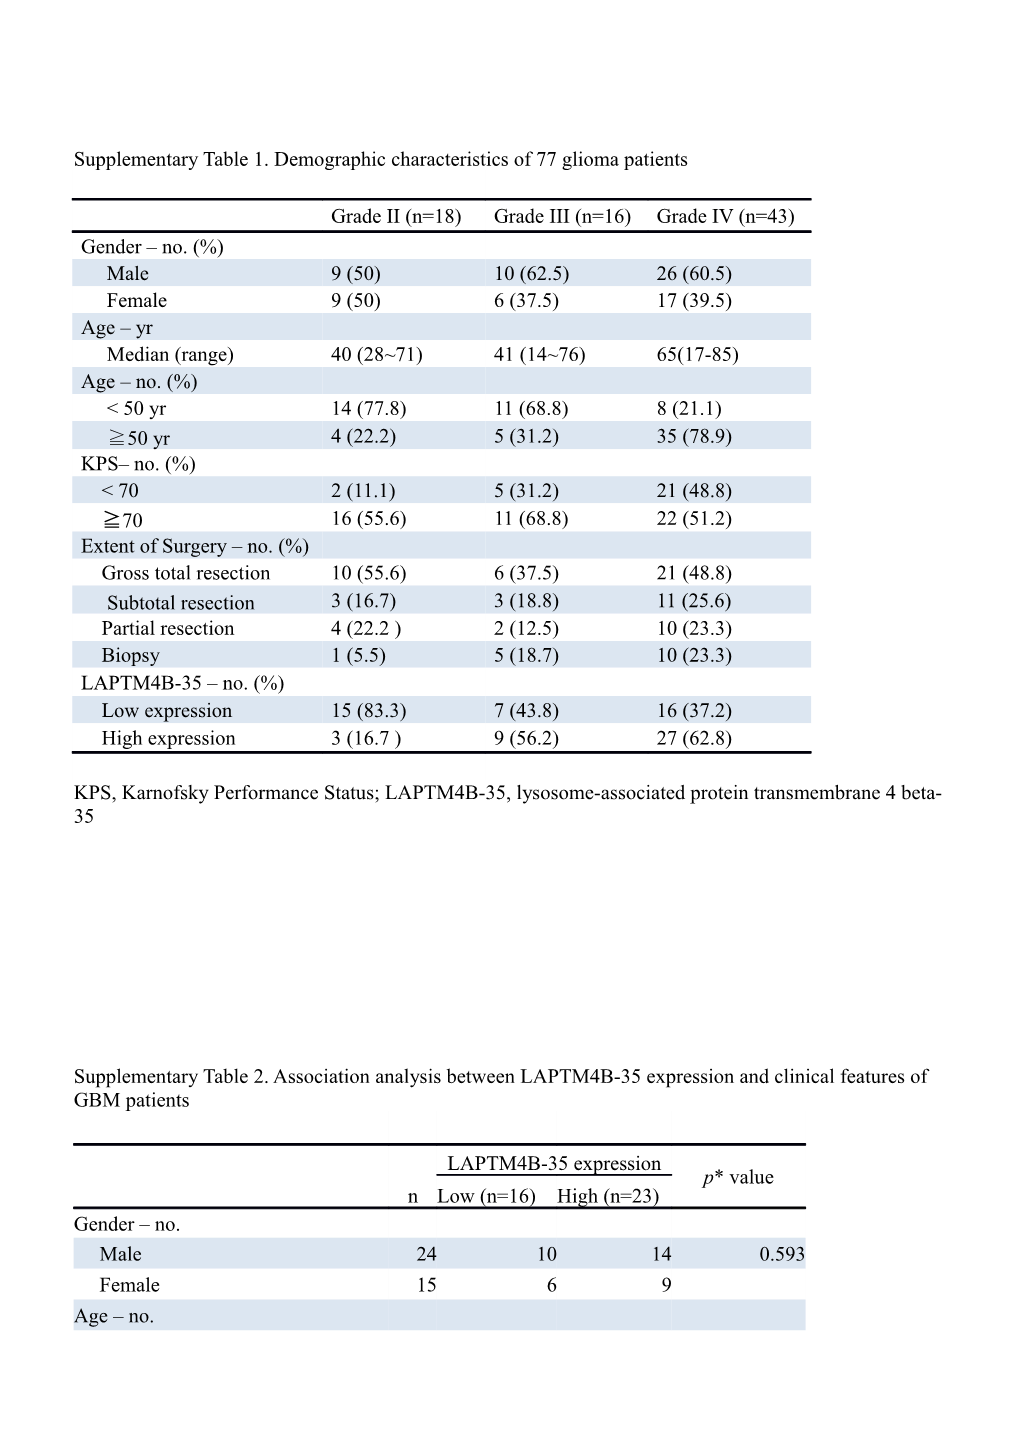 Supplementary Table 1. Demographic Characteristics of 77 Glioma Patients